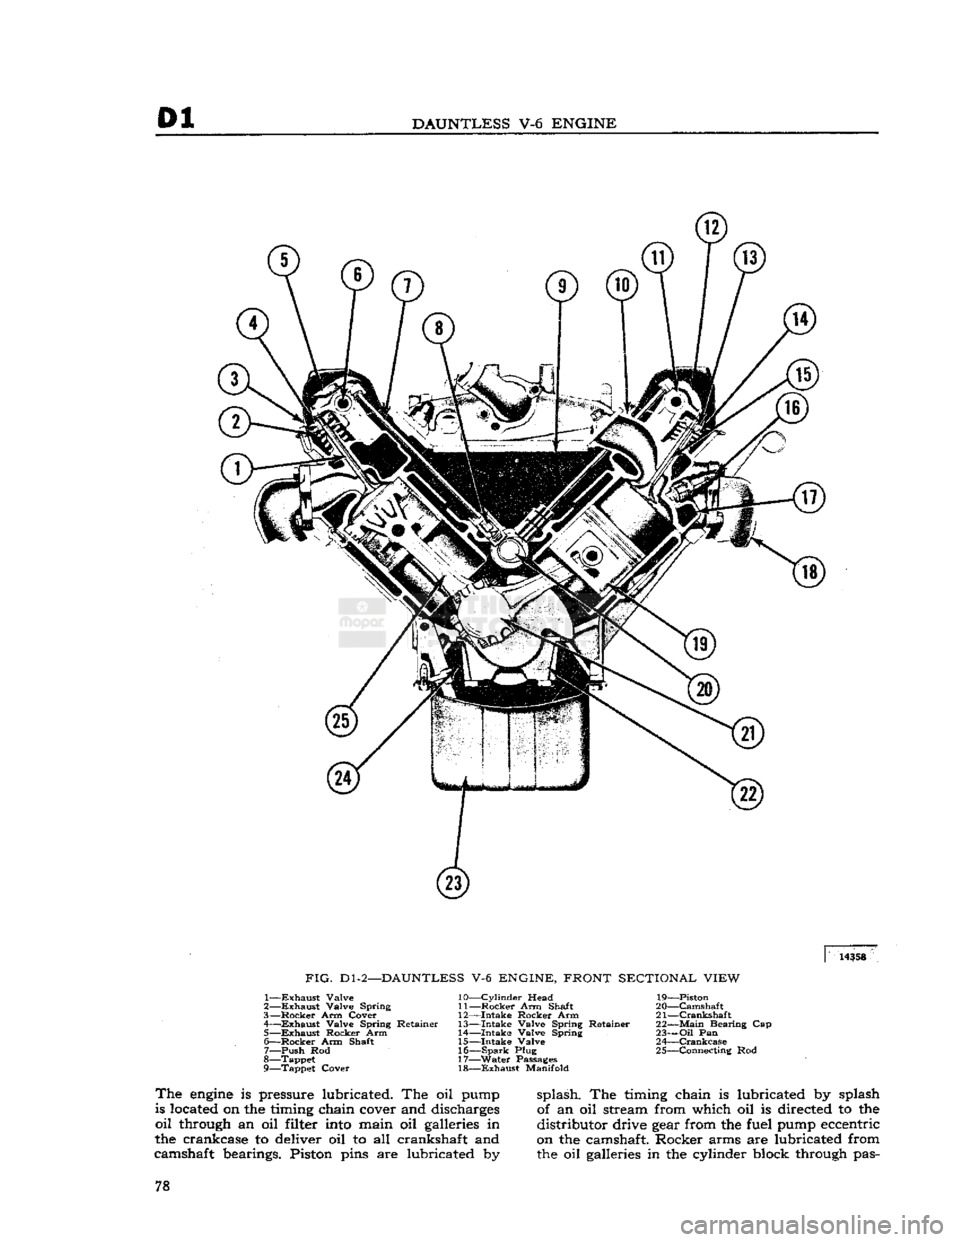 JEEP DJ 1953 User Guide 
01 
DAUNTLESS
 V-6
 ENGINE 
 14358 

FIG.
 Dl-2—DAUNTLESS
 V-6
 ENGINE, FRONT SECTIONAL VIEW 

1—
 Exhaust
 Valve 
2—
 Exhaust
 Valve Spring 
3—
 Rocker
 Arm Cover 
4—
 —Exhaust
 Valve Sp